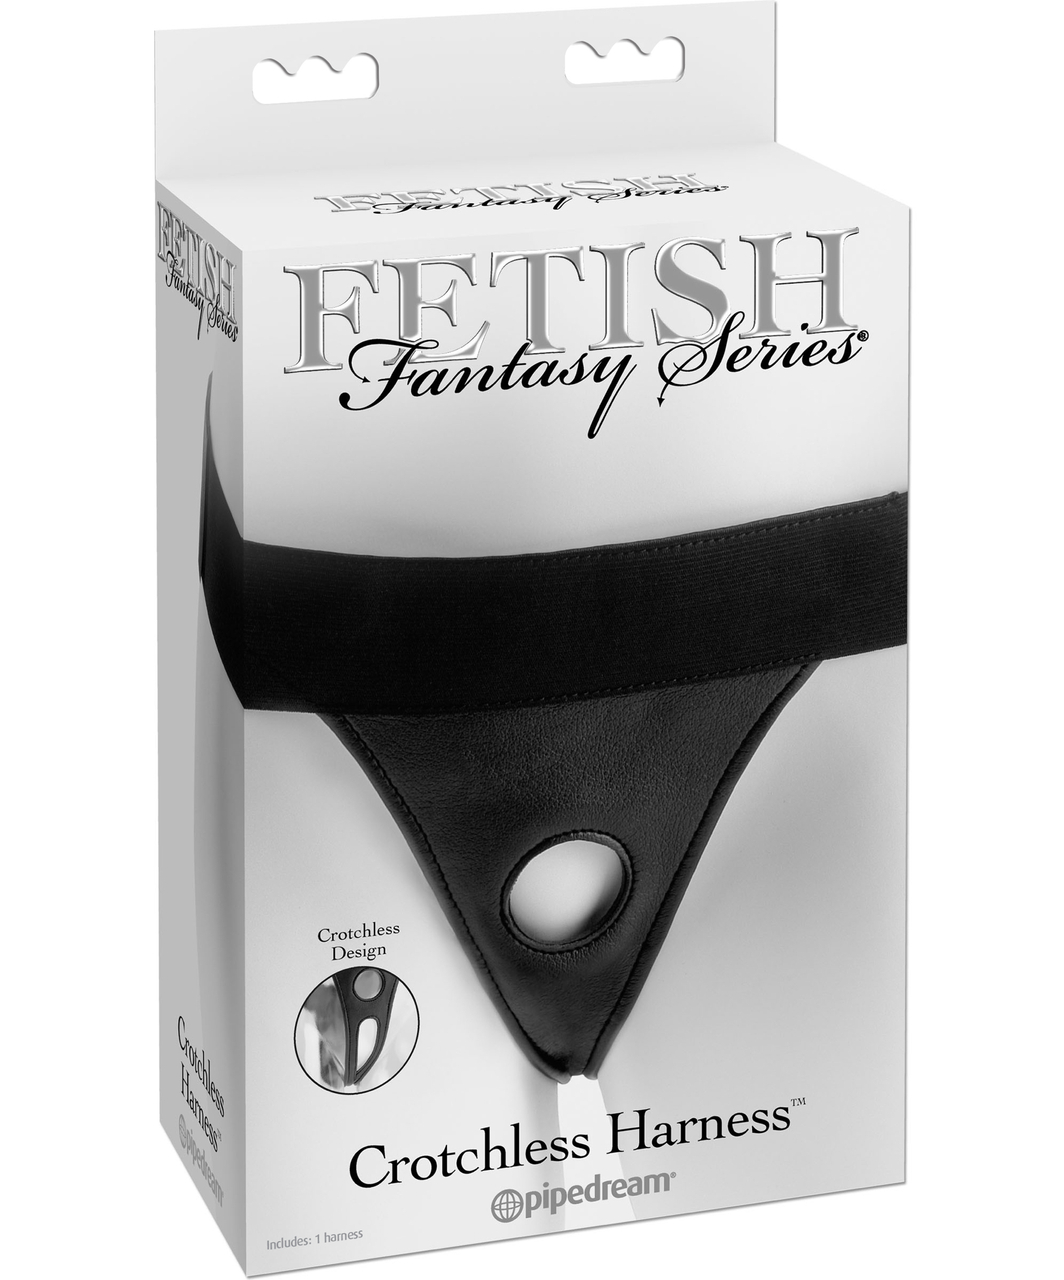 Fetish Fantasy Series Crotchless Harness